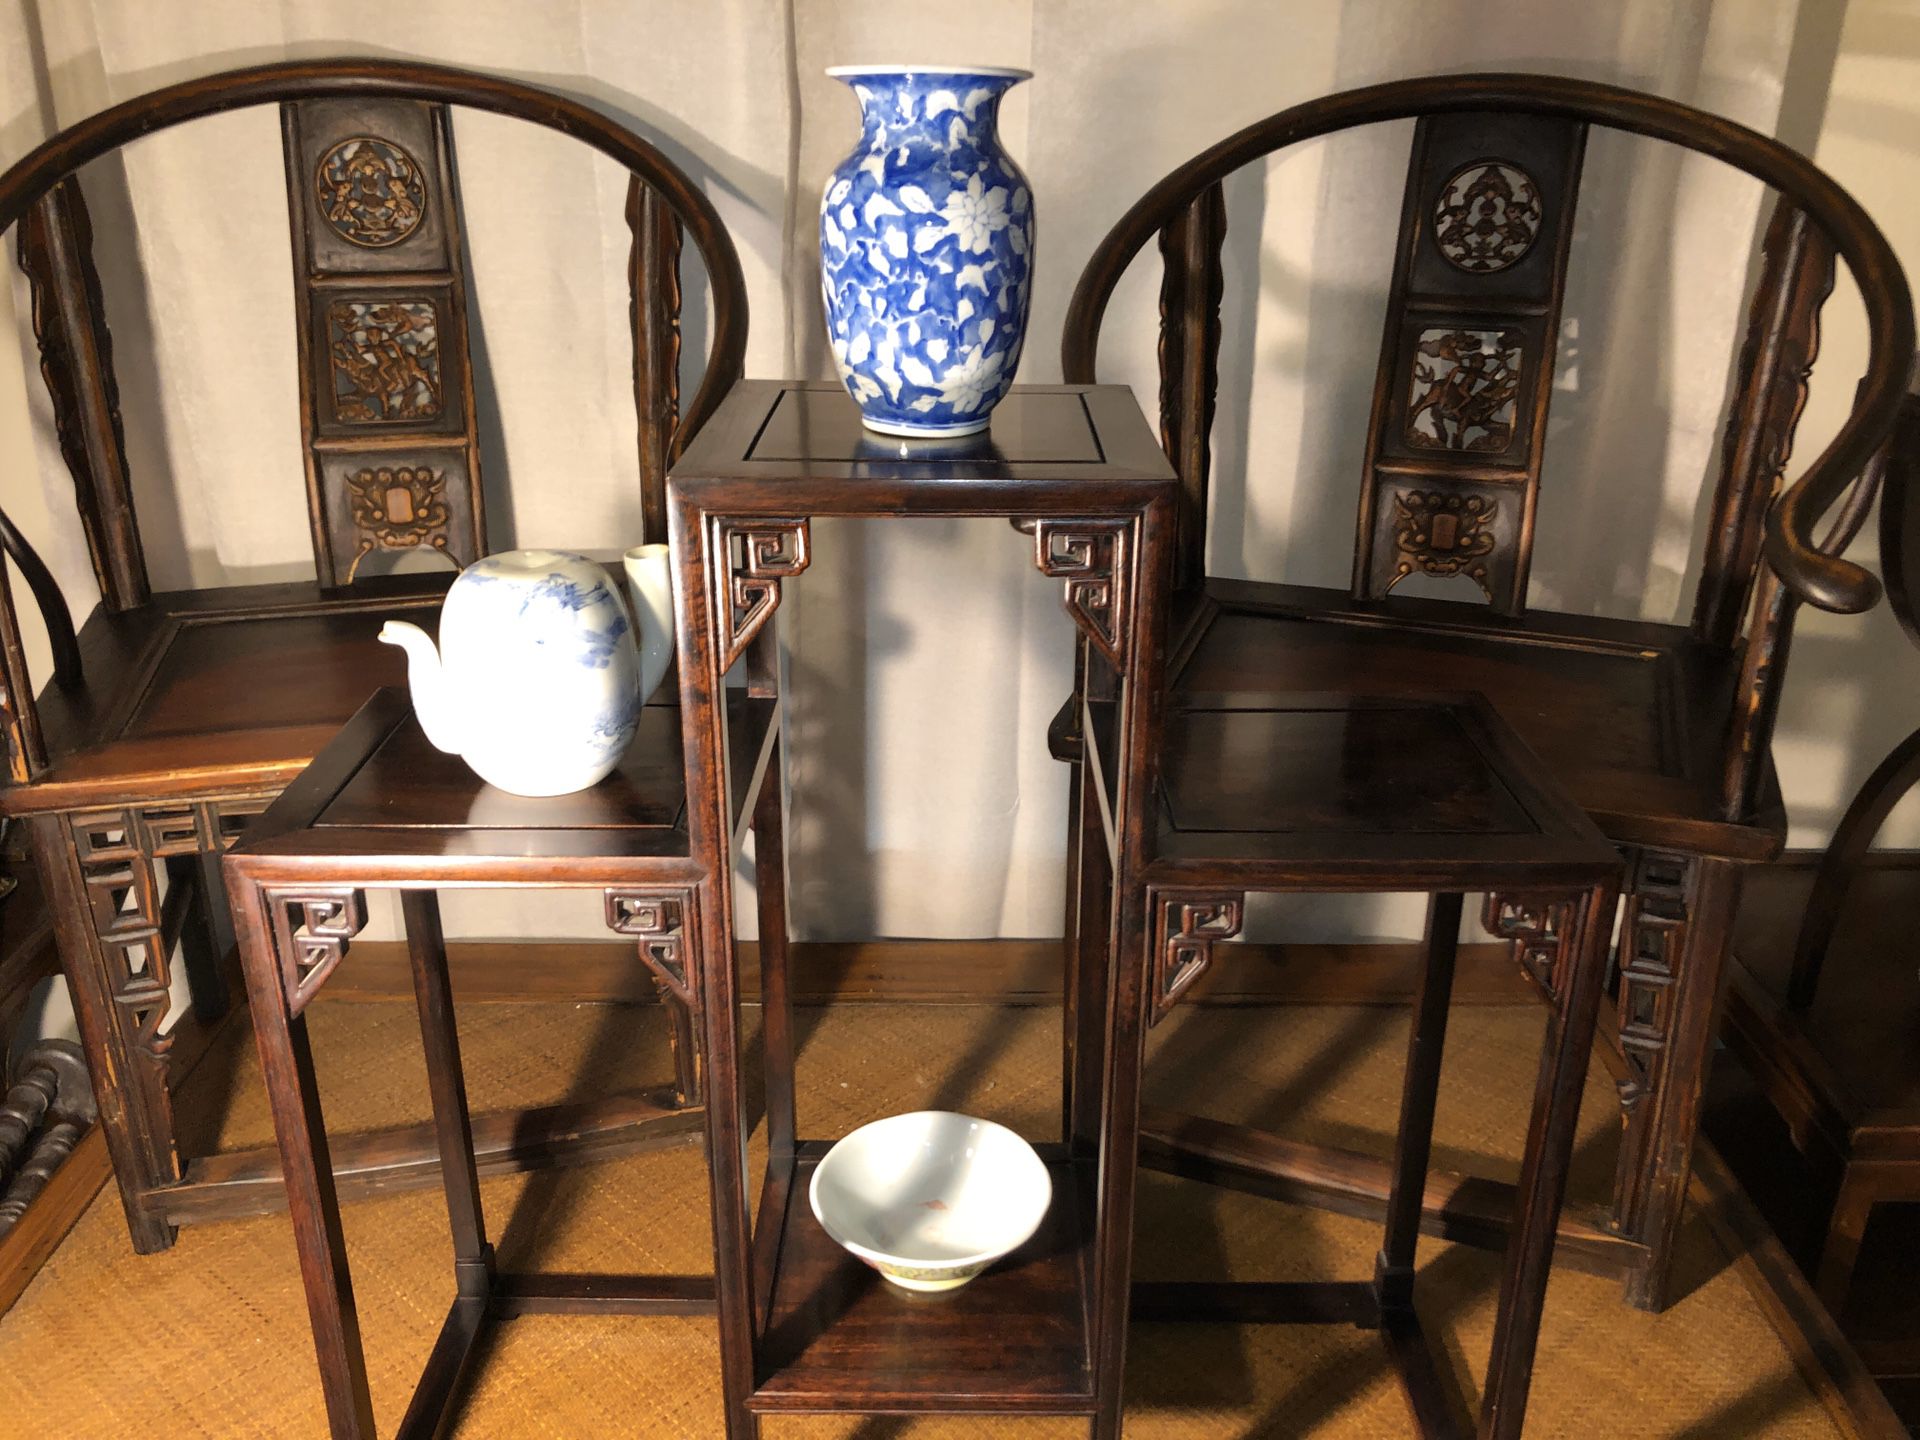 INCREDIBLY RARE AUTHENTIC ANTIQUE CHINESE DYNASTIC PERIOD FURNITURE!